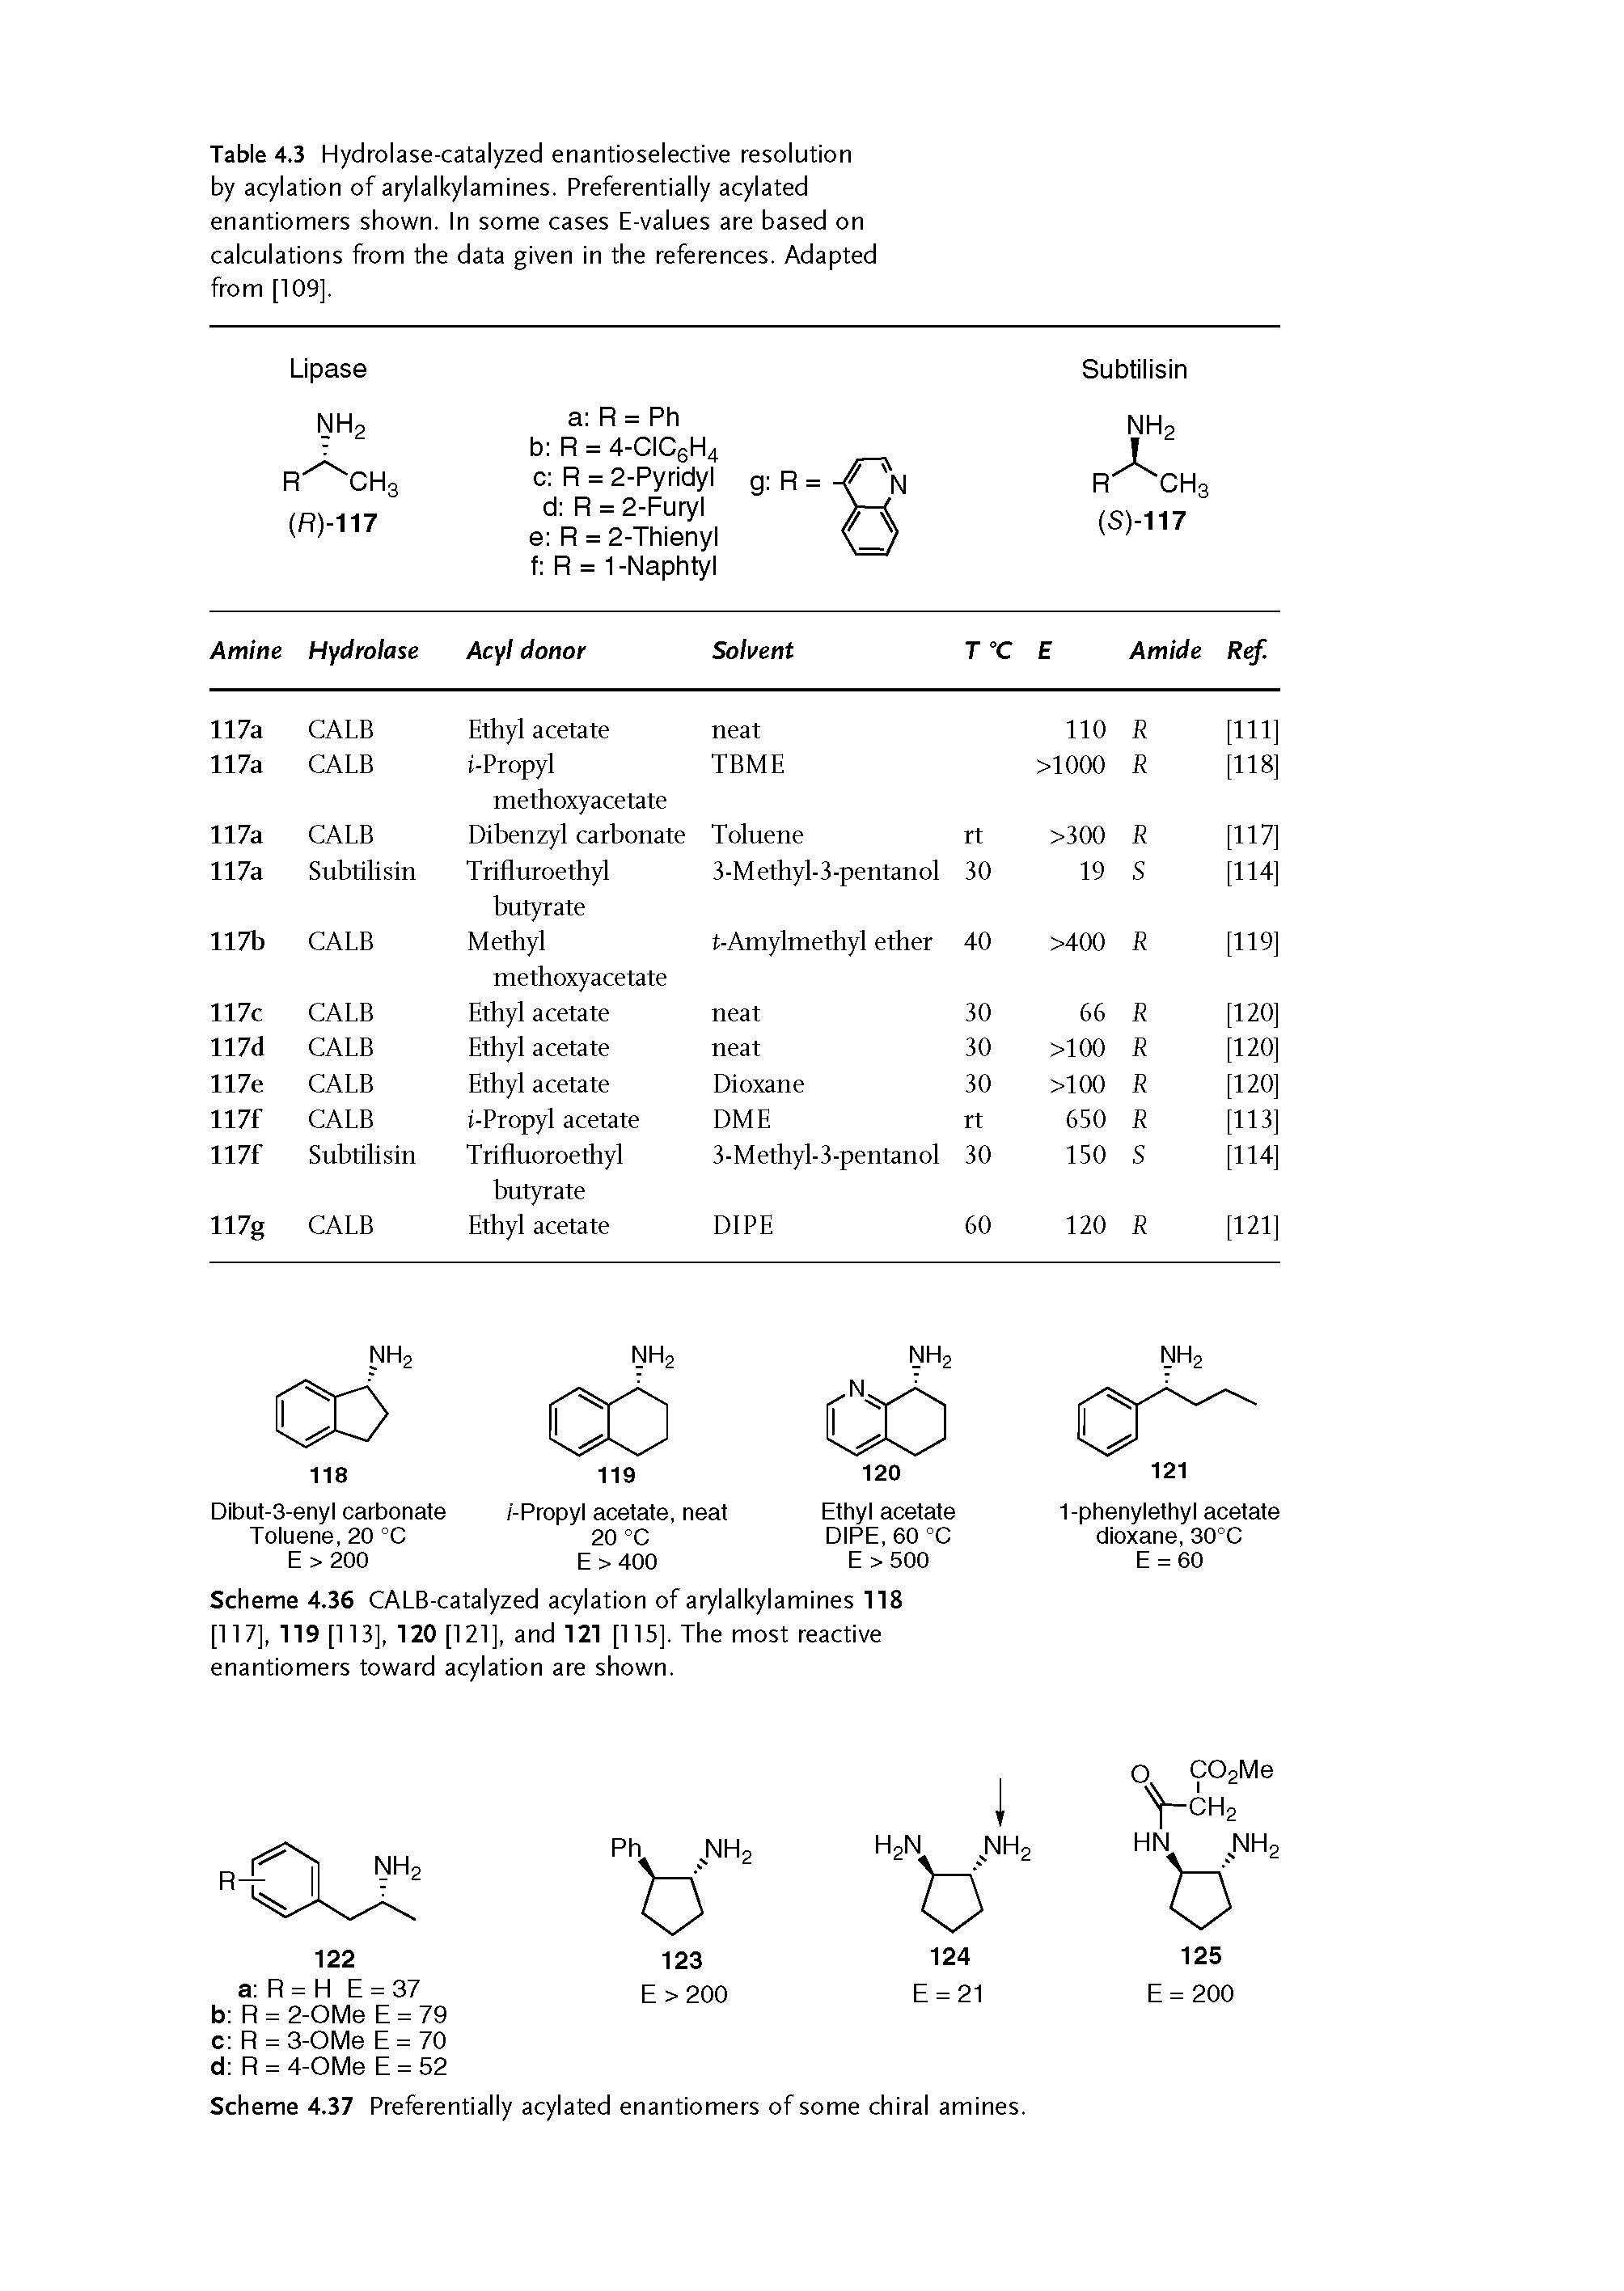 Scheme 4.36 CALB-catalyzed acylation of arylalkylamines 8 [117], 119 [113], 120 [121], and 121 [115]. The most reactive enantiomers toward acylation are shown.